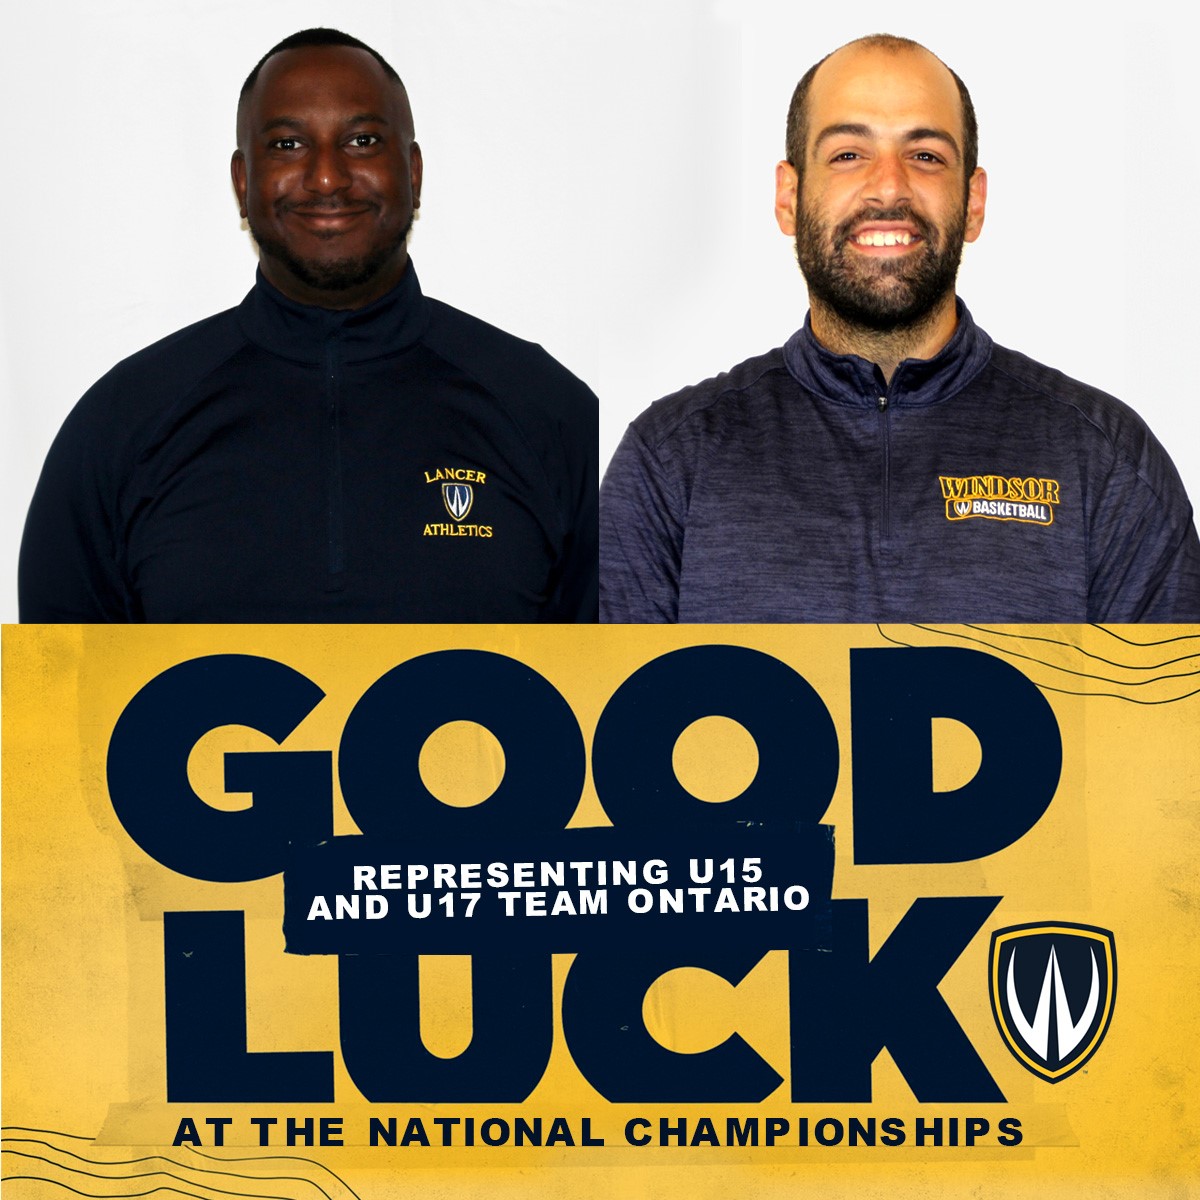 Good luck to Lancer men’s basketball assistant coaches, Andrew Anderi and Paul Ekeocha representing U15 and U17 Team Ontario at the 2023 Canadian National Championships! #LancerFamily